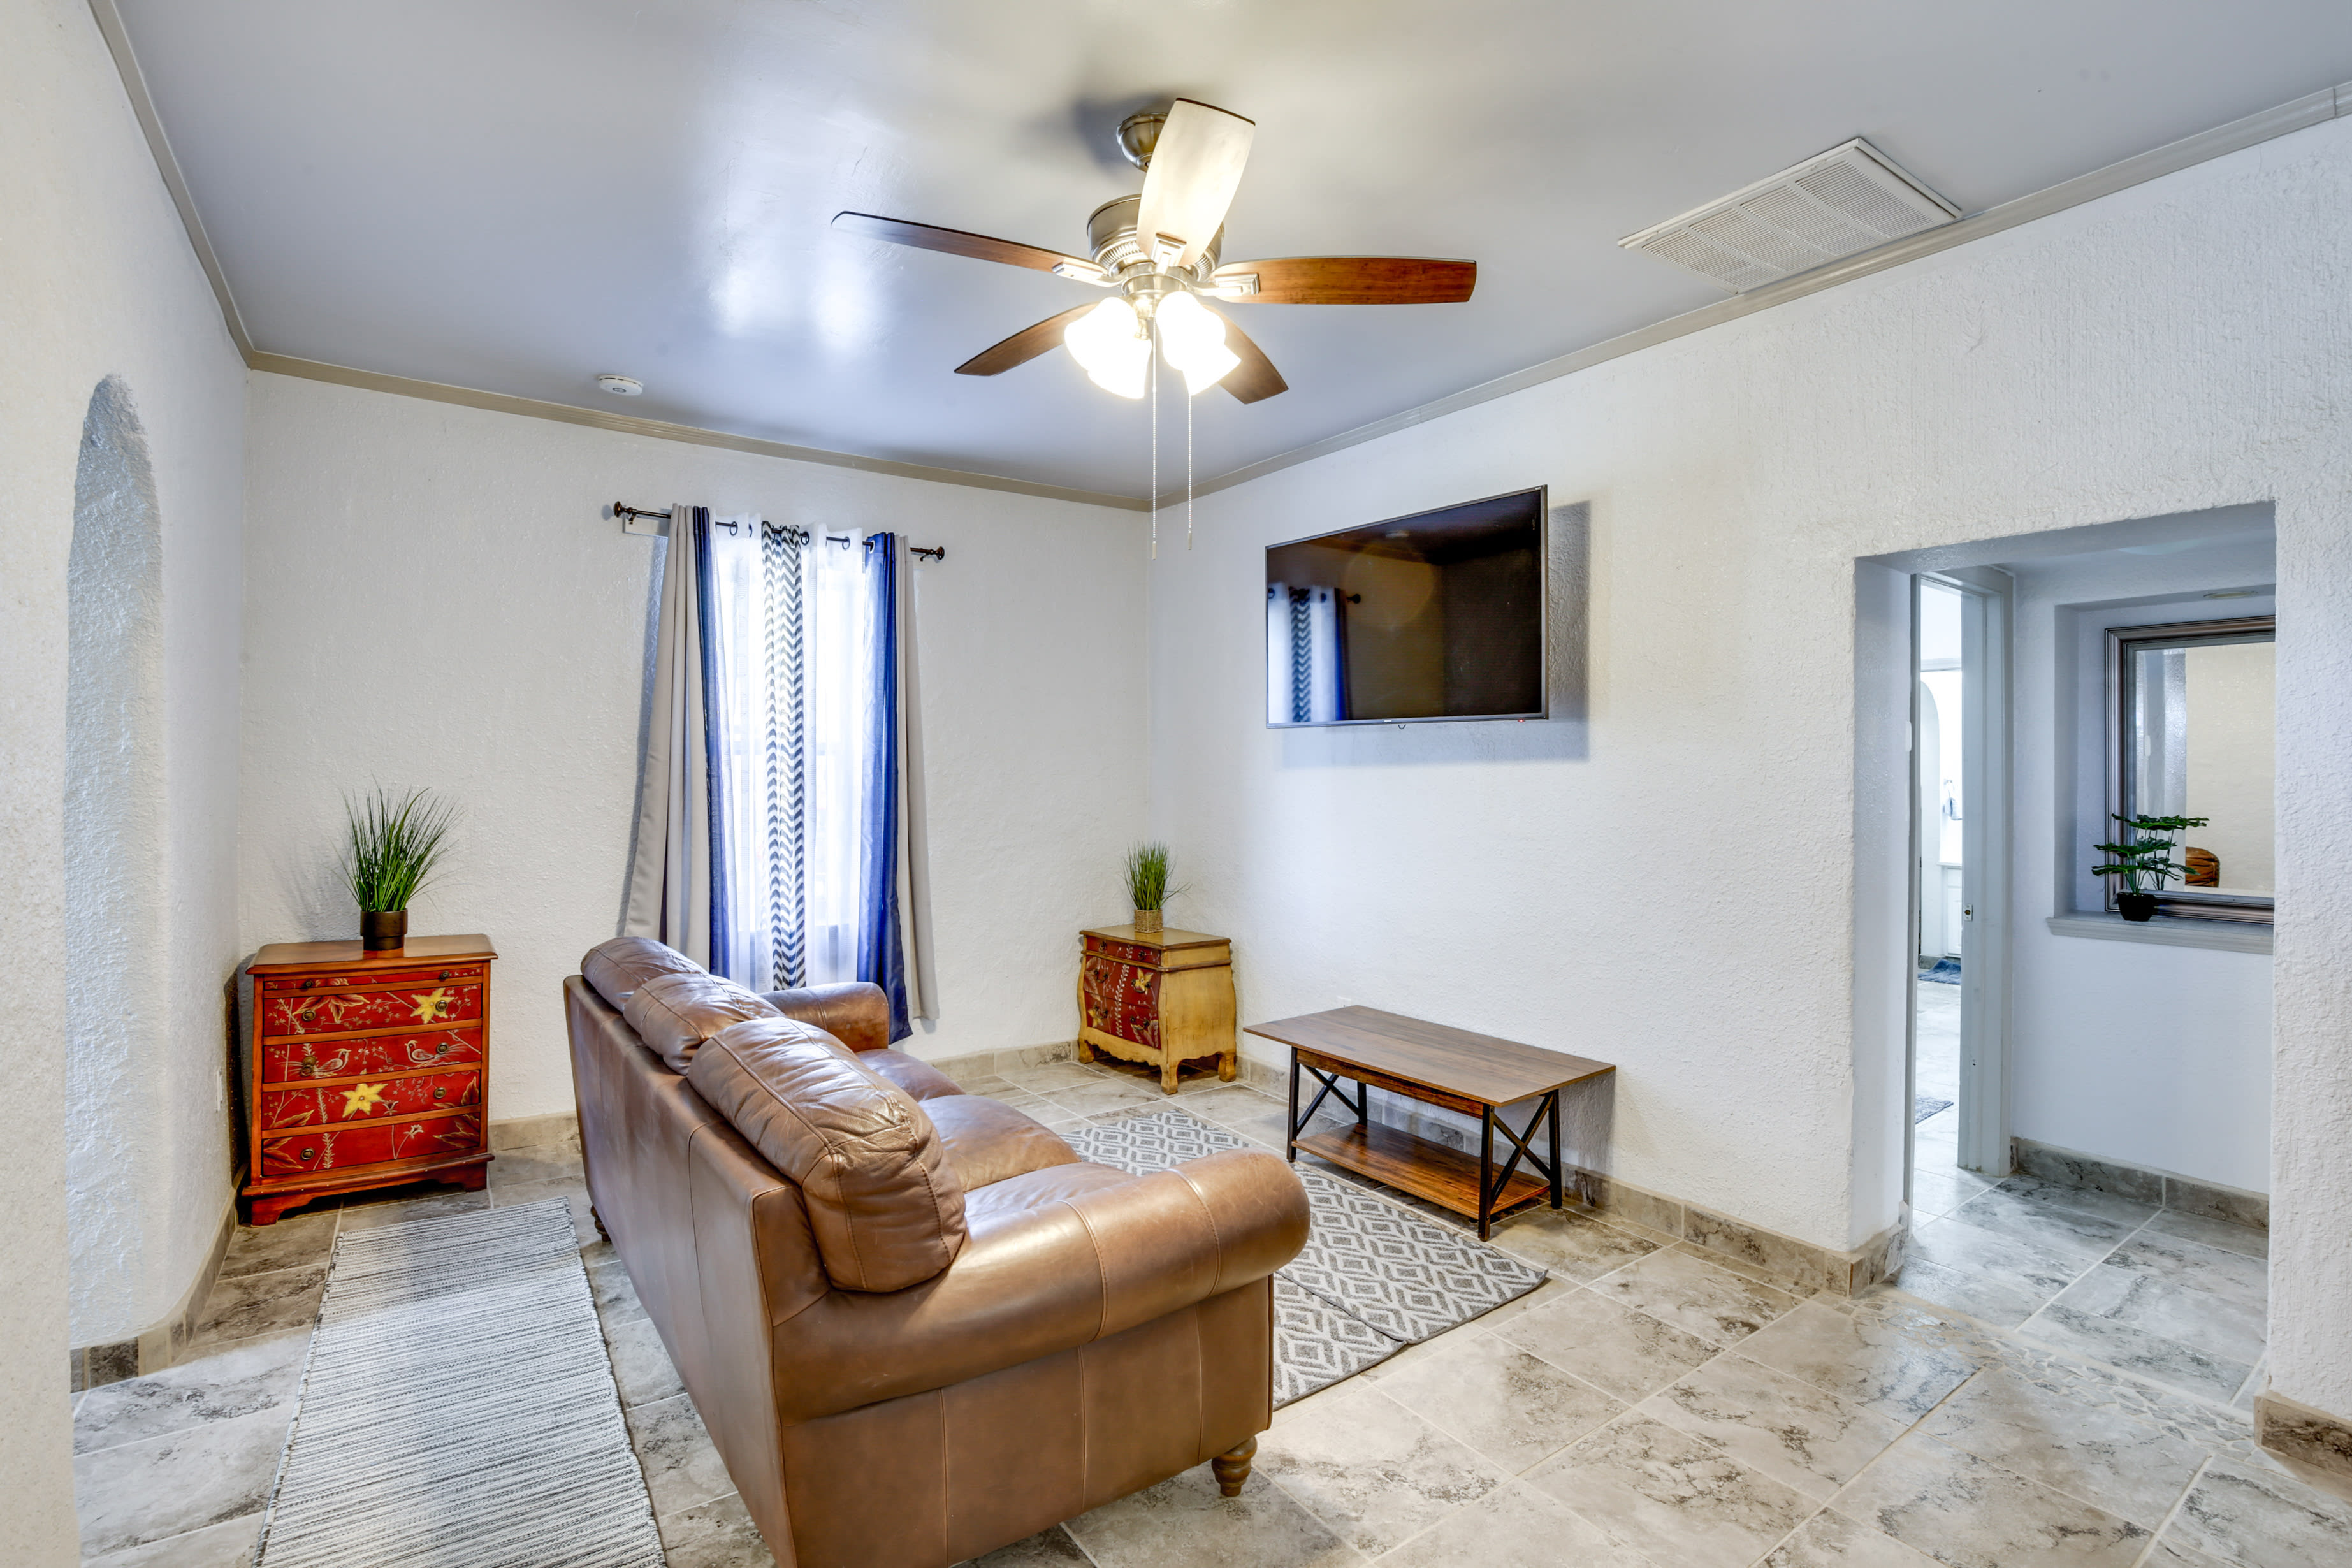 El Paso Vacation Rental | 3BR | 2BA | 1,200 Sq Ft | Stairs Required